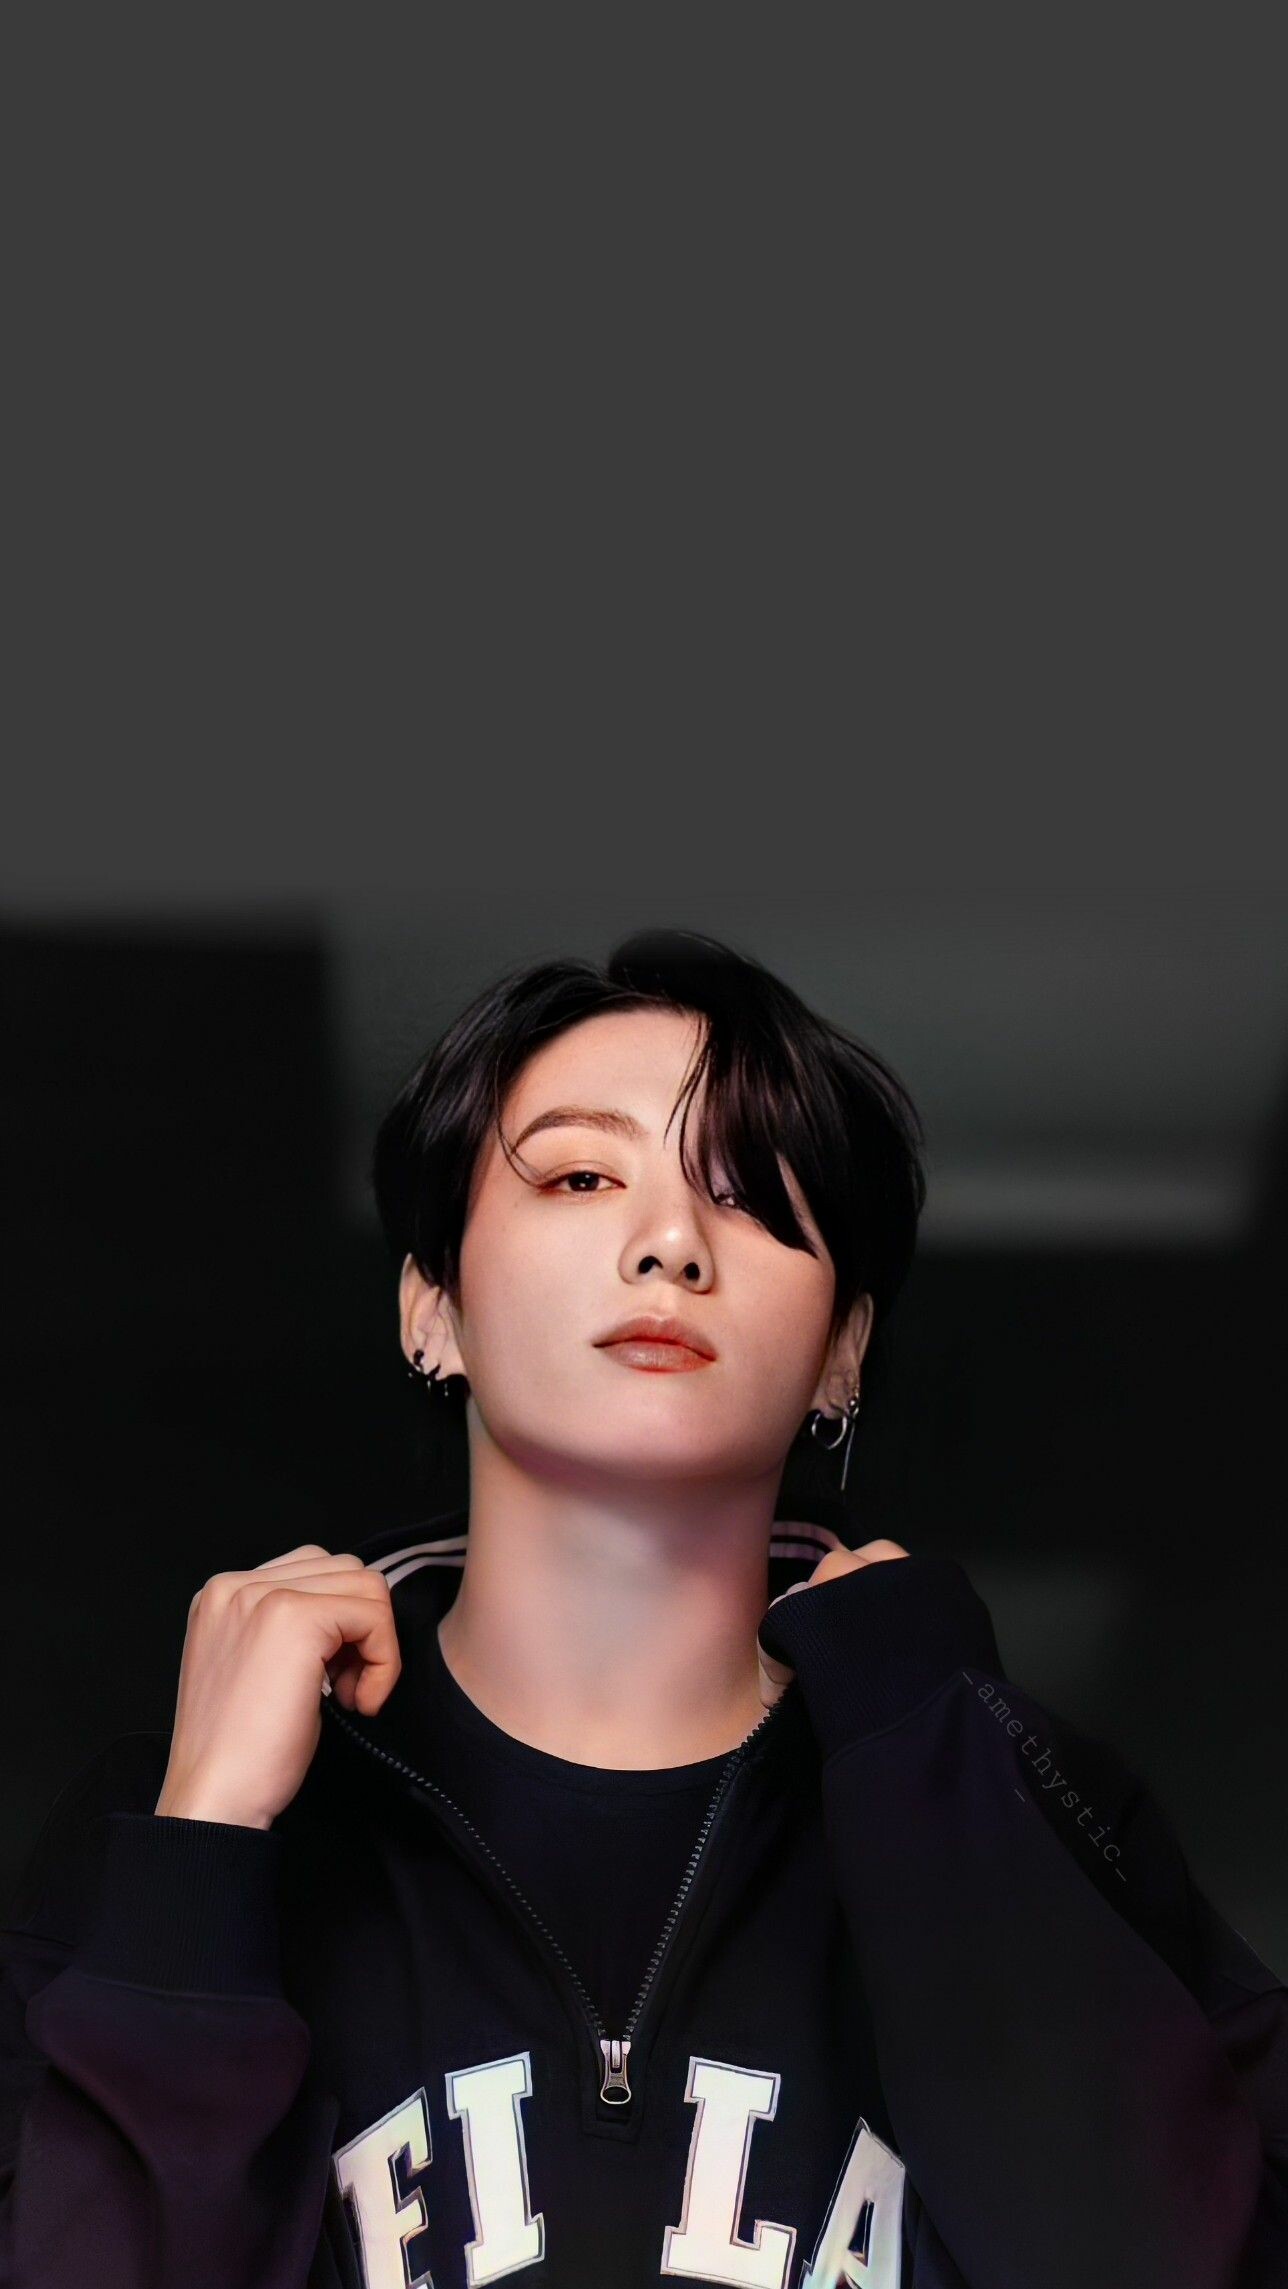 Jungkook: Made his debut as a member of BTS with the release of the single 2 Cool 4 Skool Under BTS. 1290x2290 HD Wallpaper.